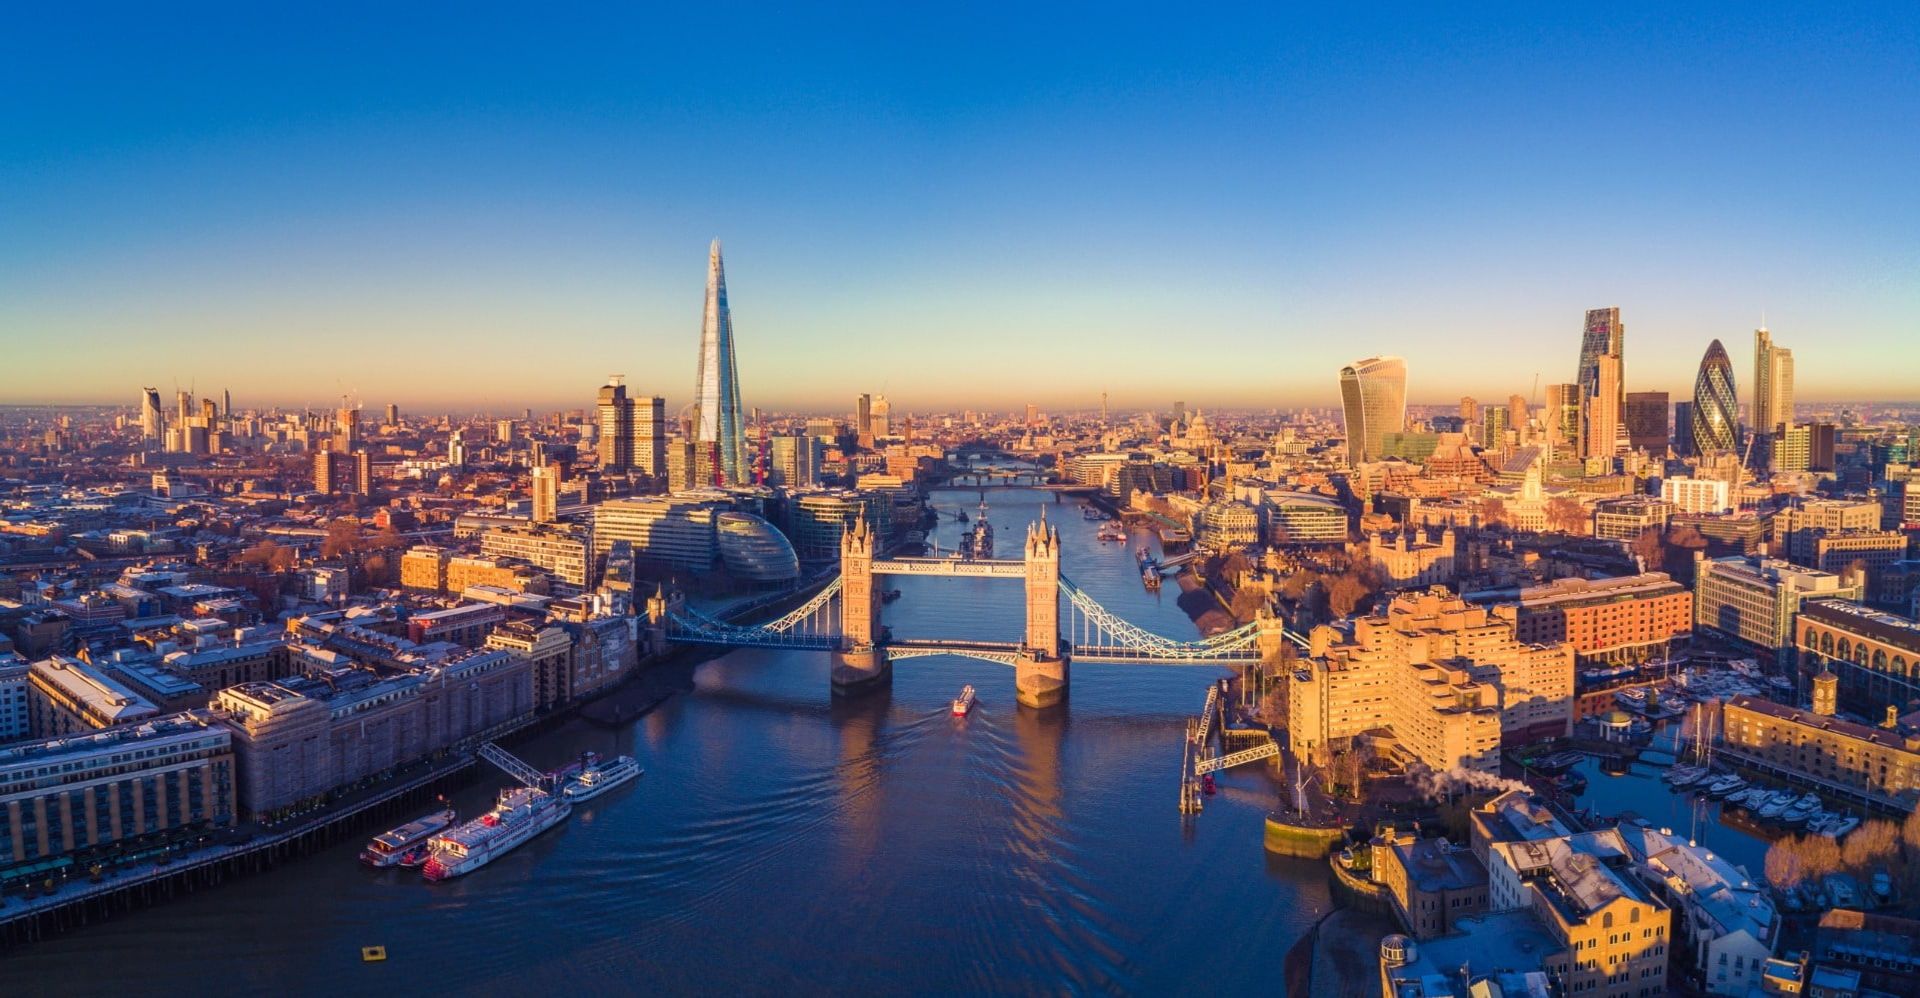 London is at the heart of the life science industry and Next Phase Recruitment attend events that are often held in London. You can find a new job in life sciences and a career in cell therapy if you attend the Advanced Therapies conference in London in October 2021